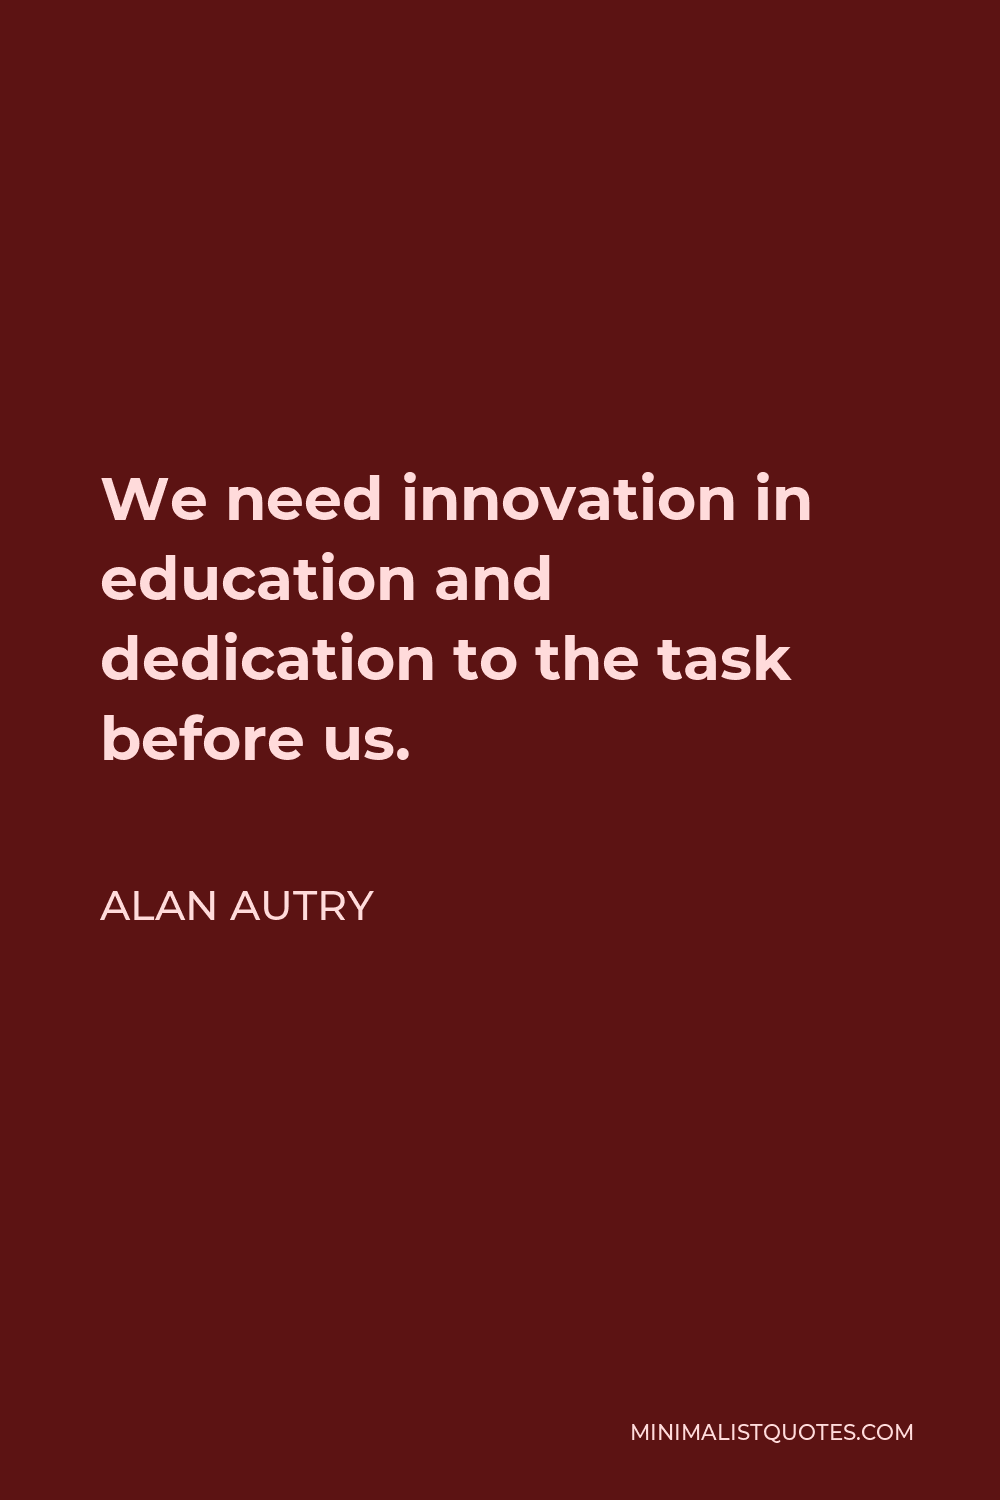 Alan Autry Quote - We need innovation in education and dedication to the task before us.